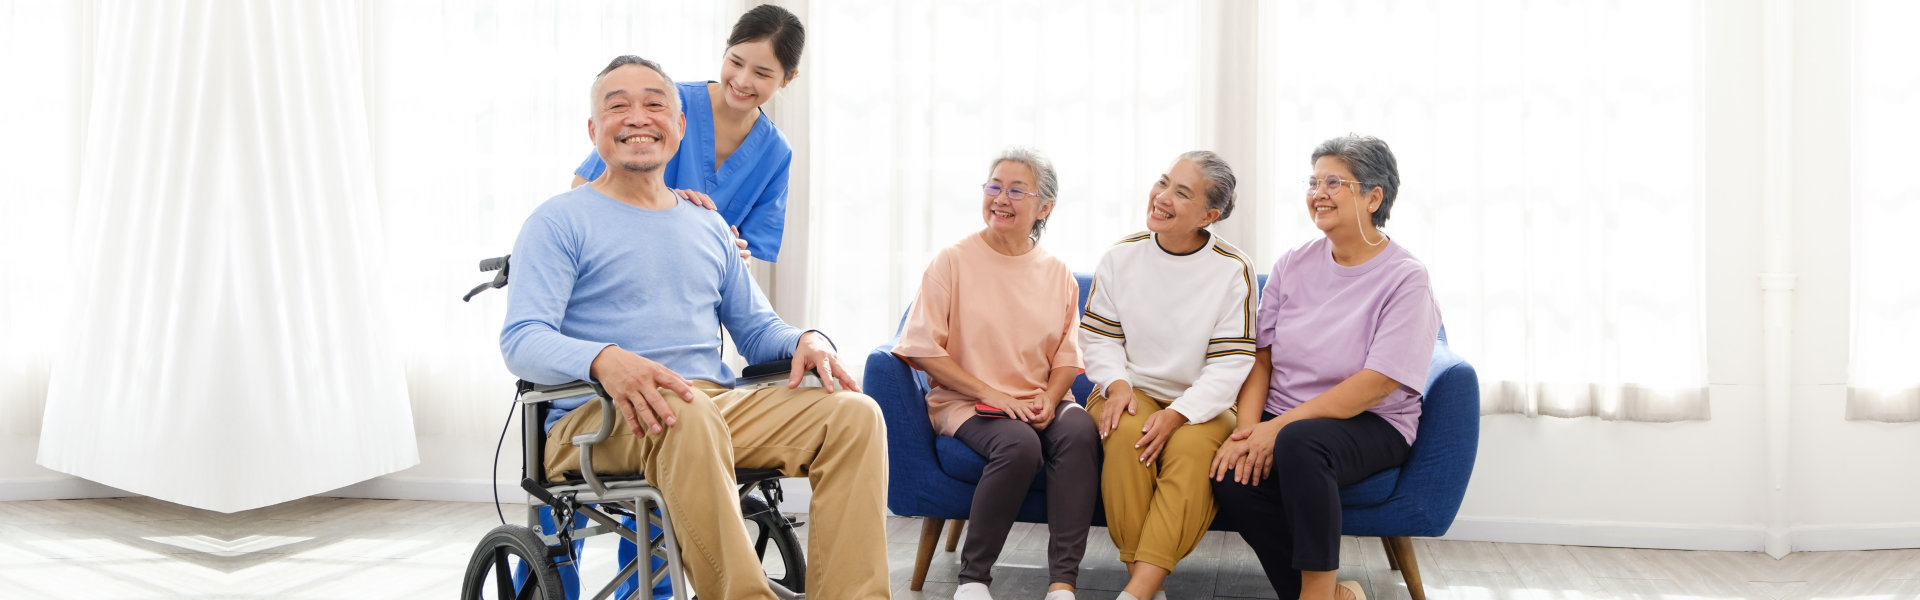 The caregiver therapist stands with a man sitting in a wheelchair with a group of women sitting on a sofa